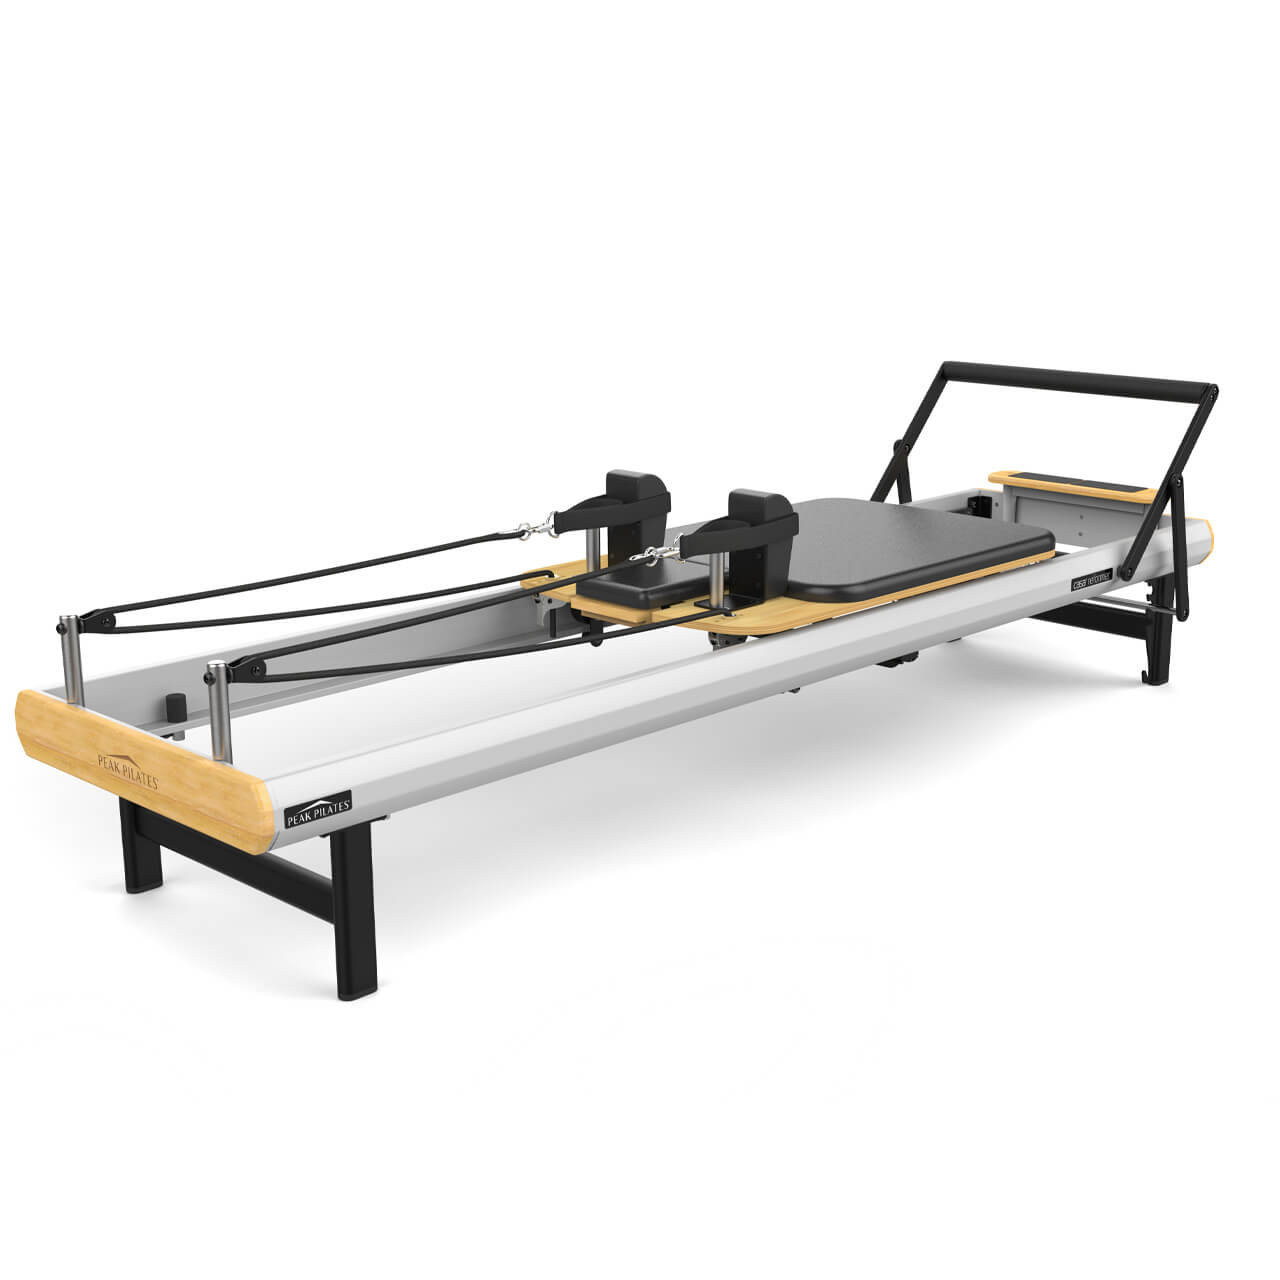 My Review of the Peak Pilates MVe Reformer